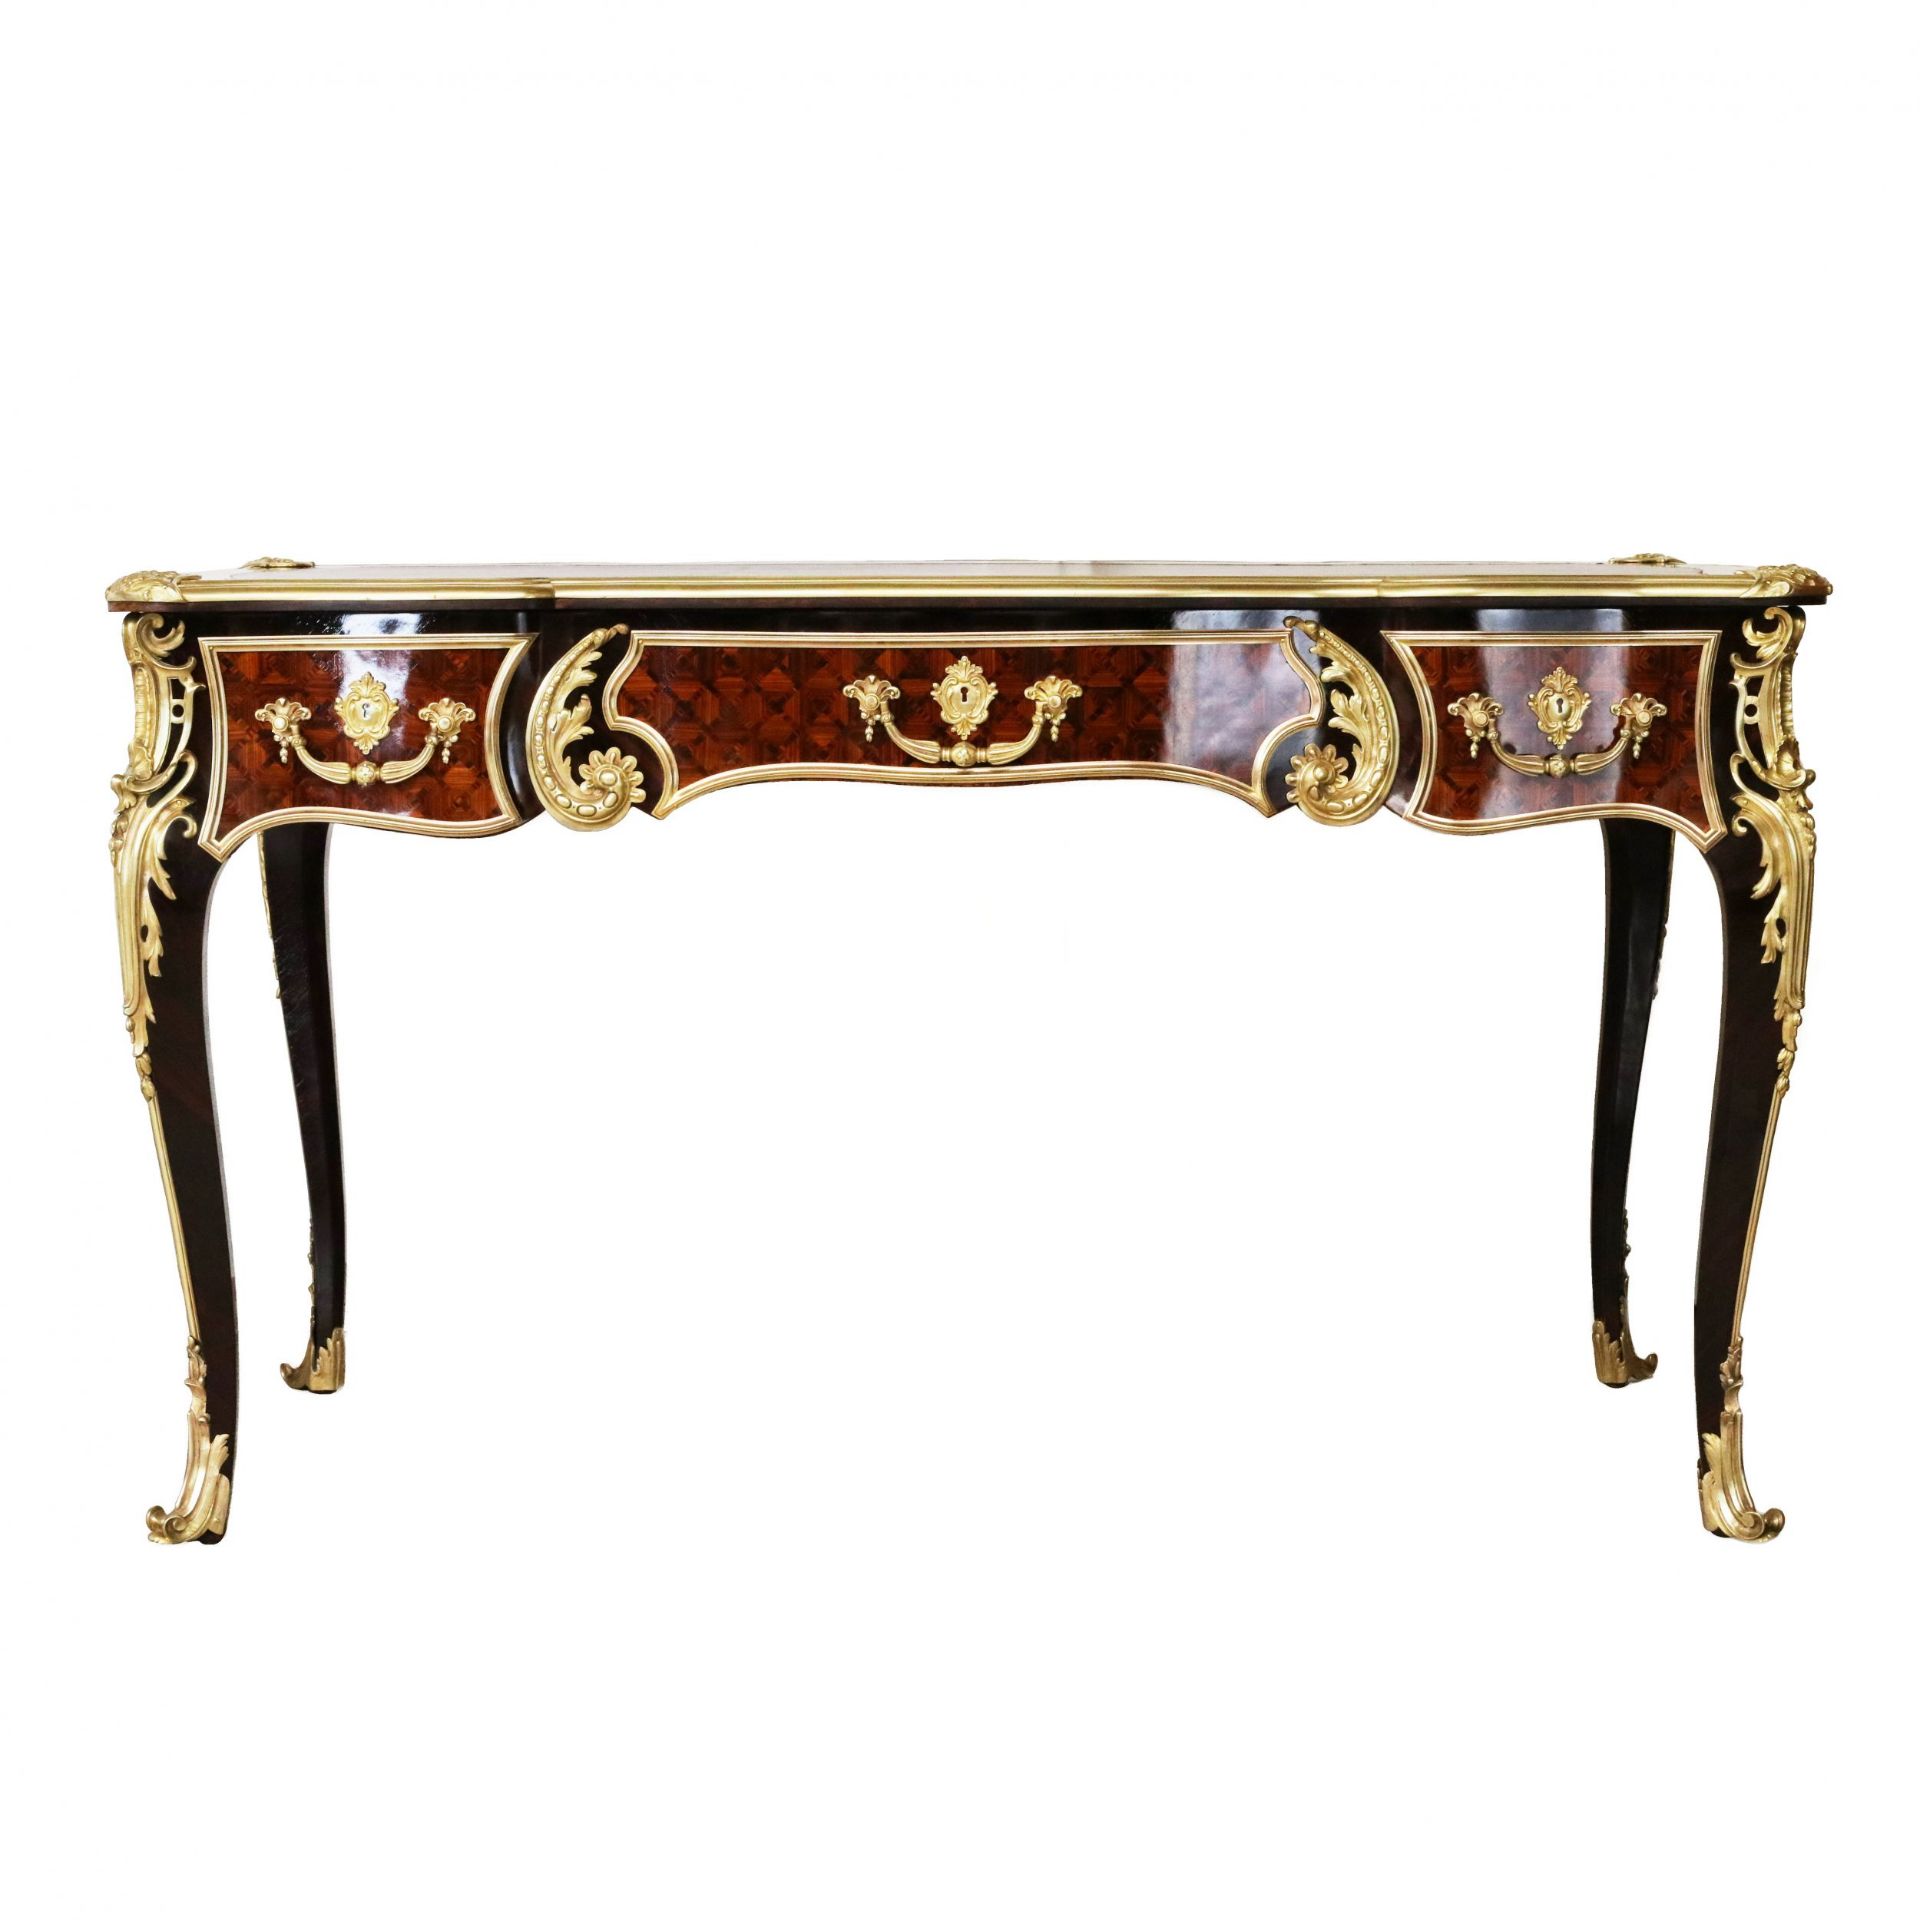 Magnificent writing desk in wood and gilded bronze, Louis XV style. - Image 4 of 8